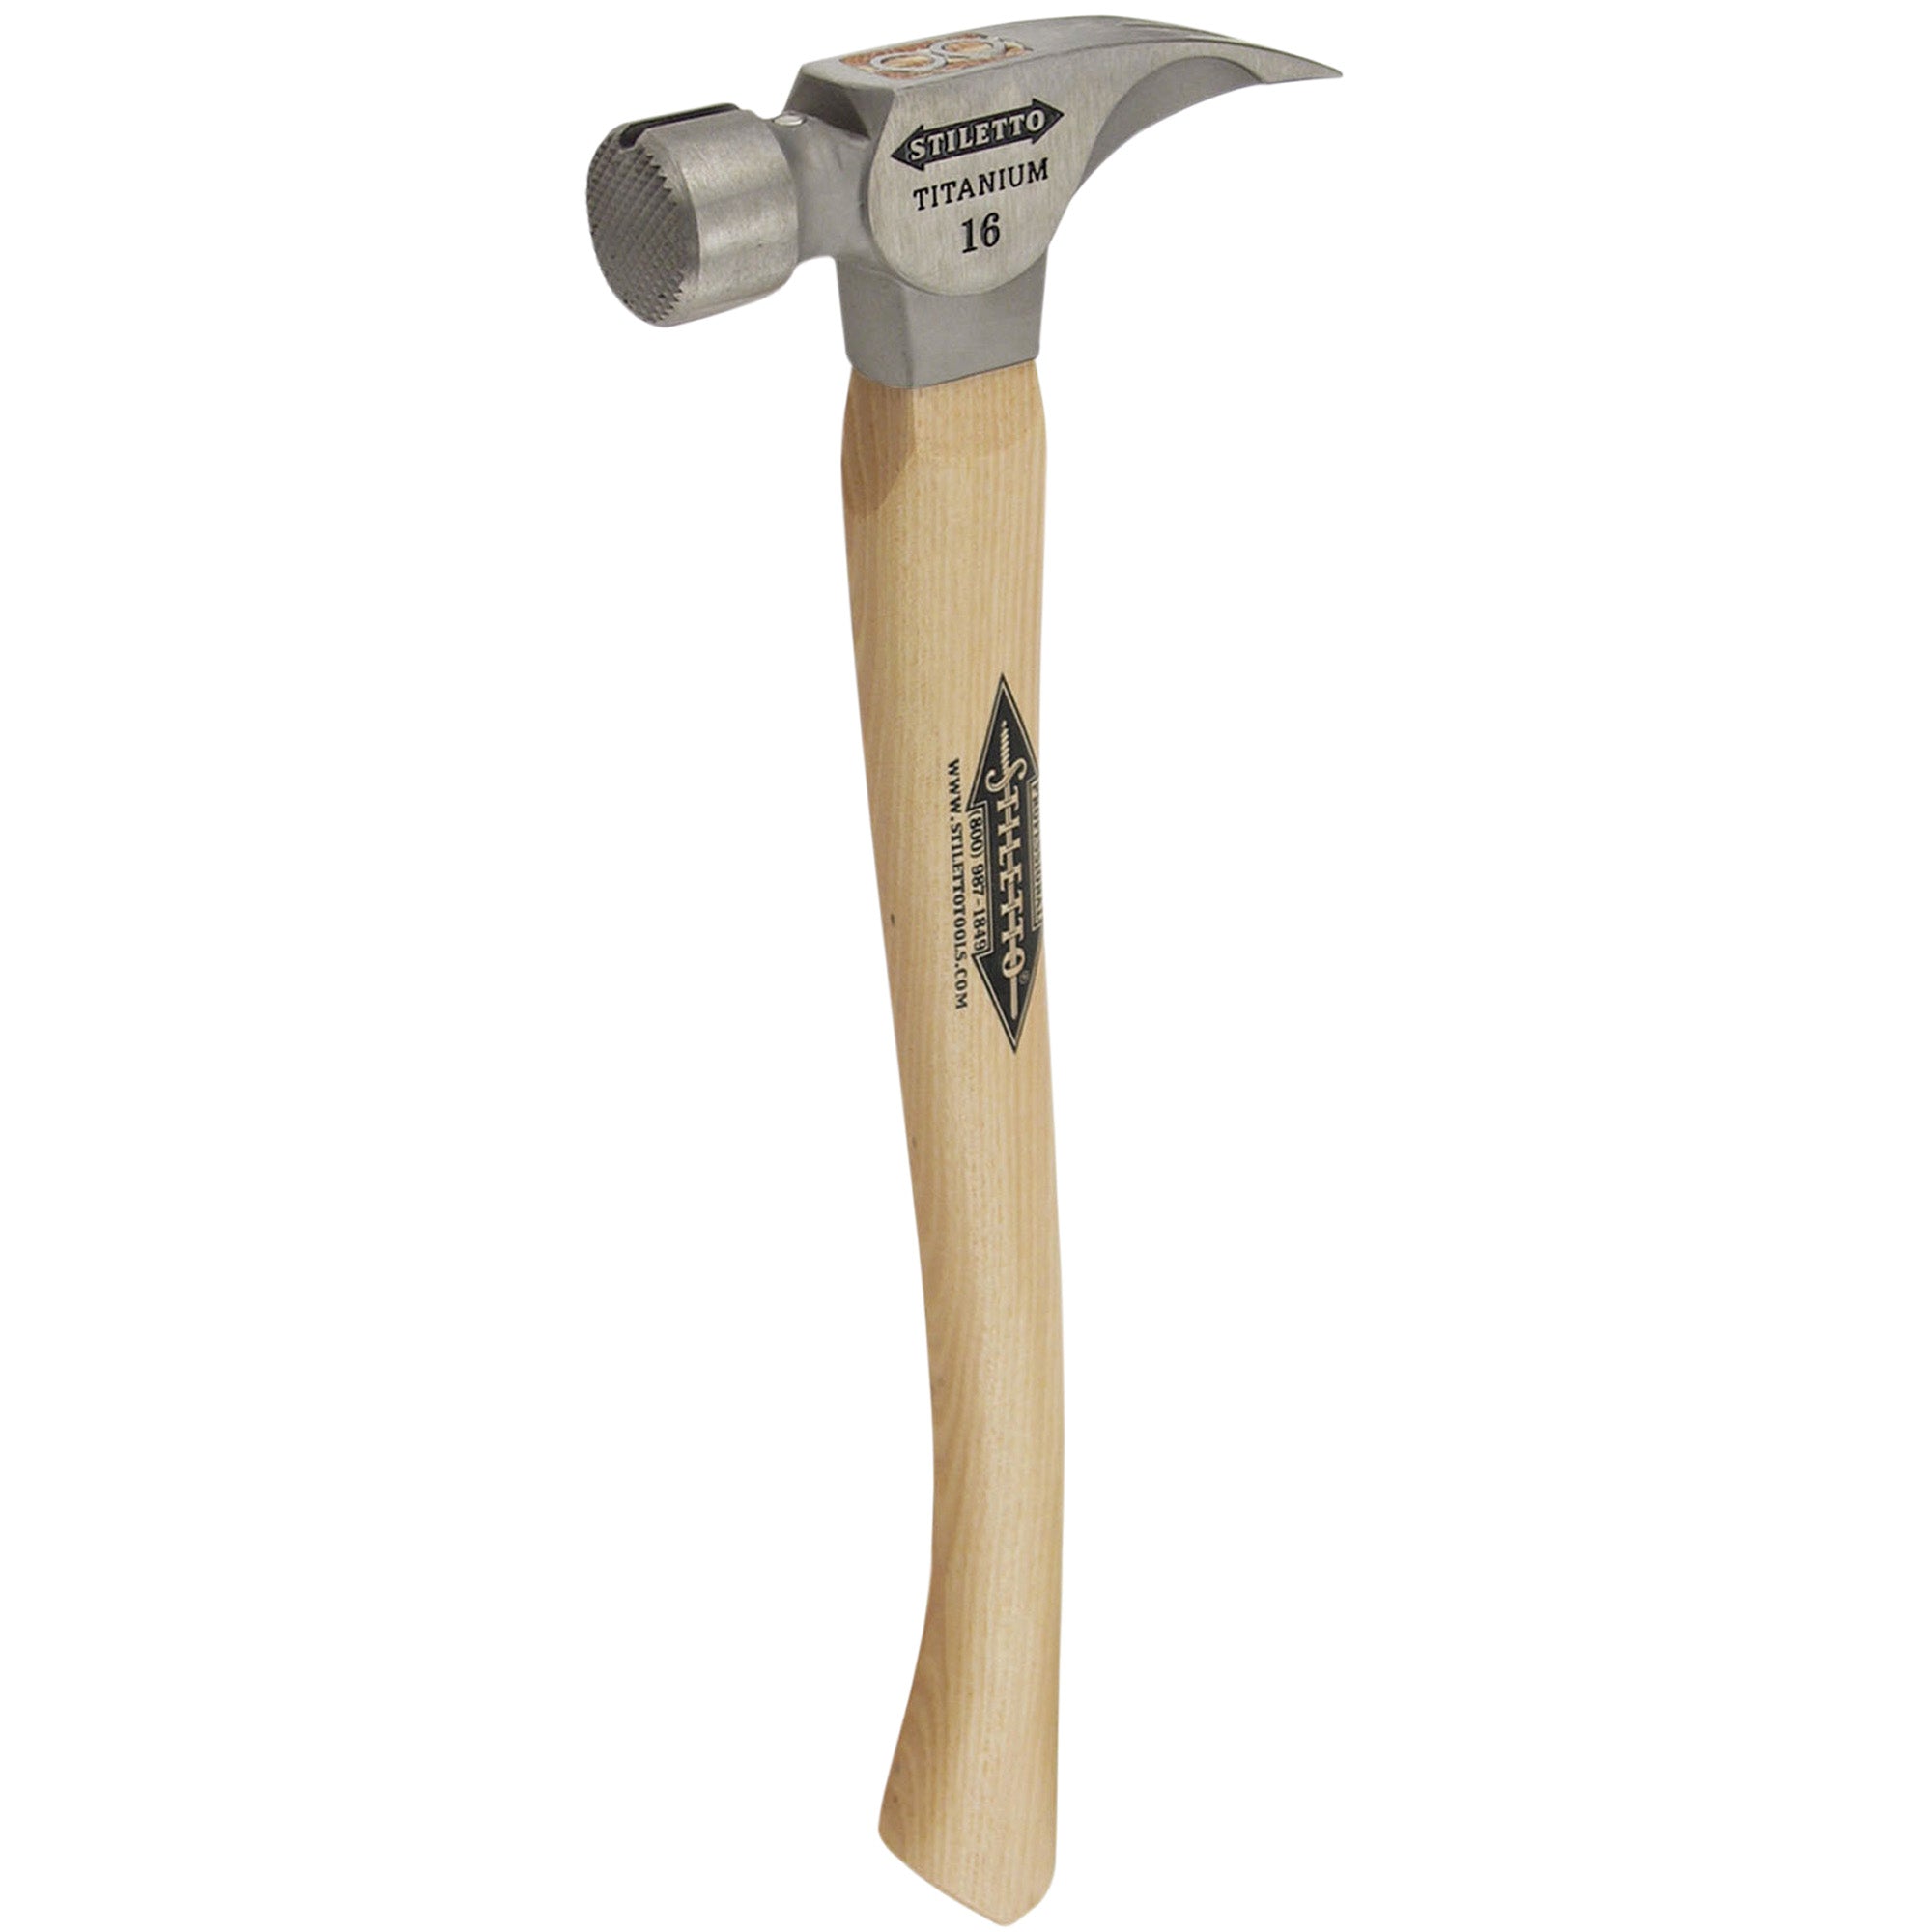 18" Hickory Curved Handle 16 oz. Titanium Head Round Milled Face Straight Claw "MuscleHead" Framer Hammer